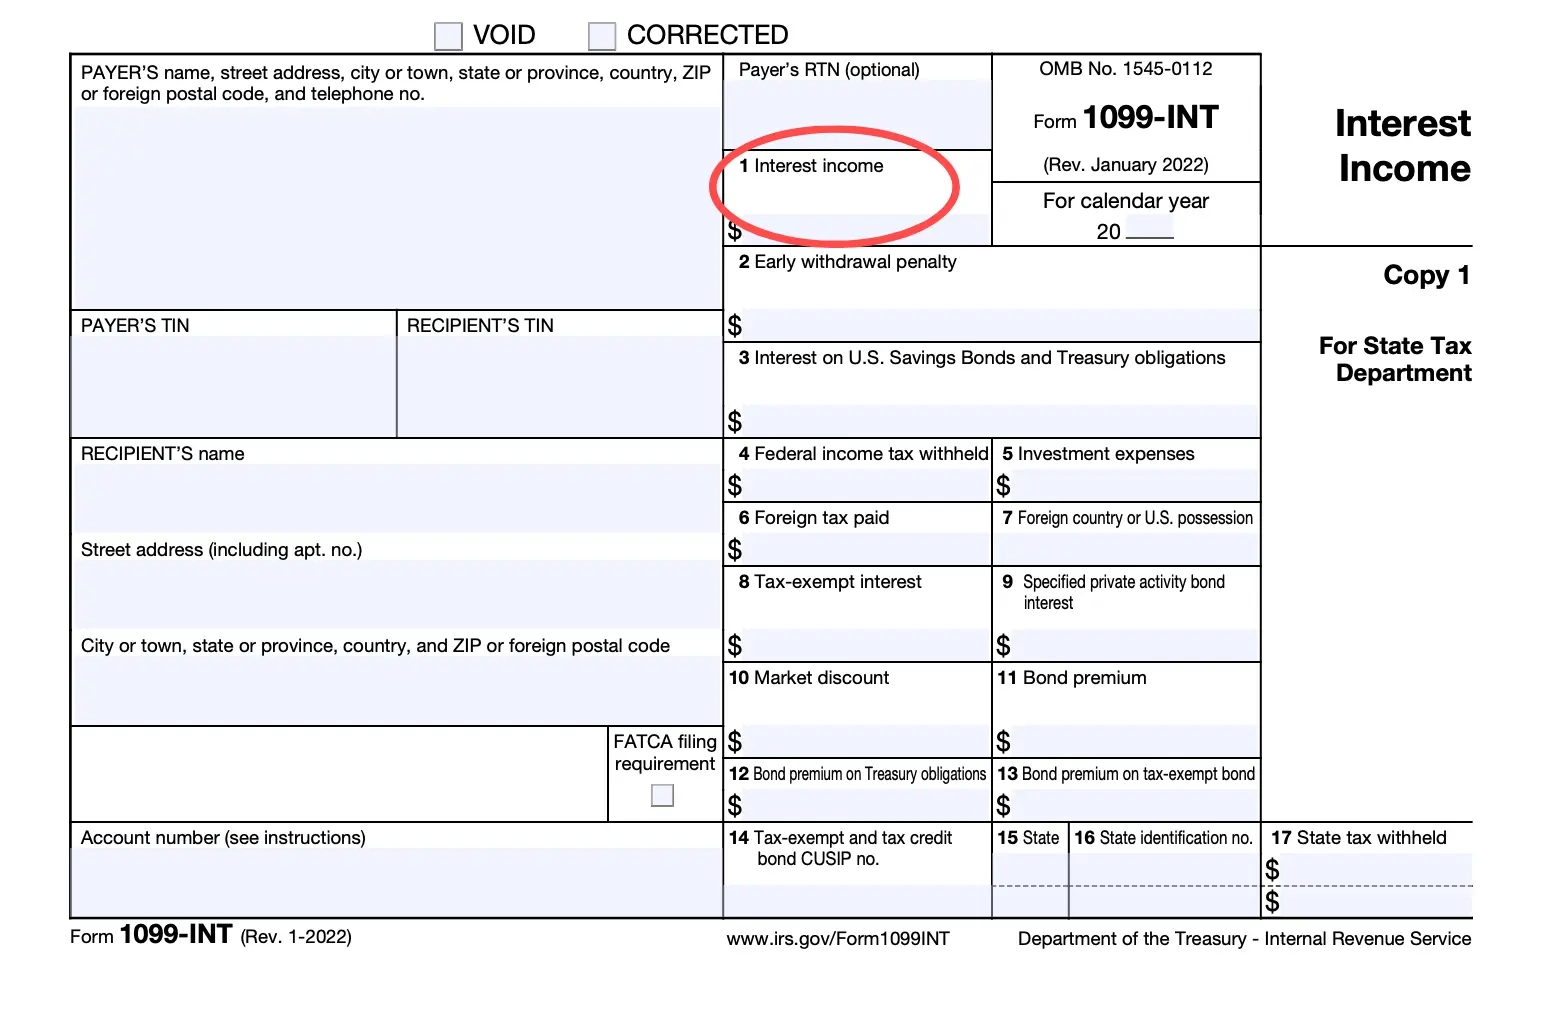 Image of Form 1099-INT for interest income reporting. Includes payer and recipient information, tax withholding, and bond premium details. Relevant for taxes.